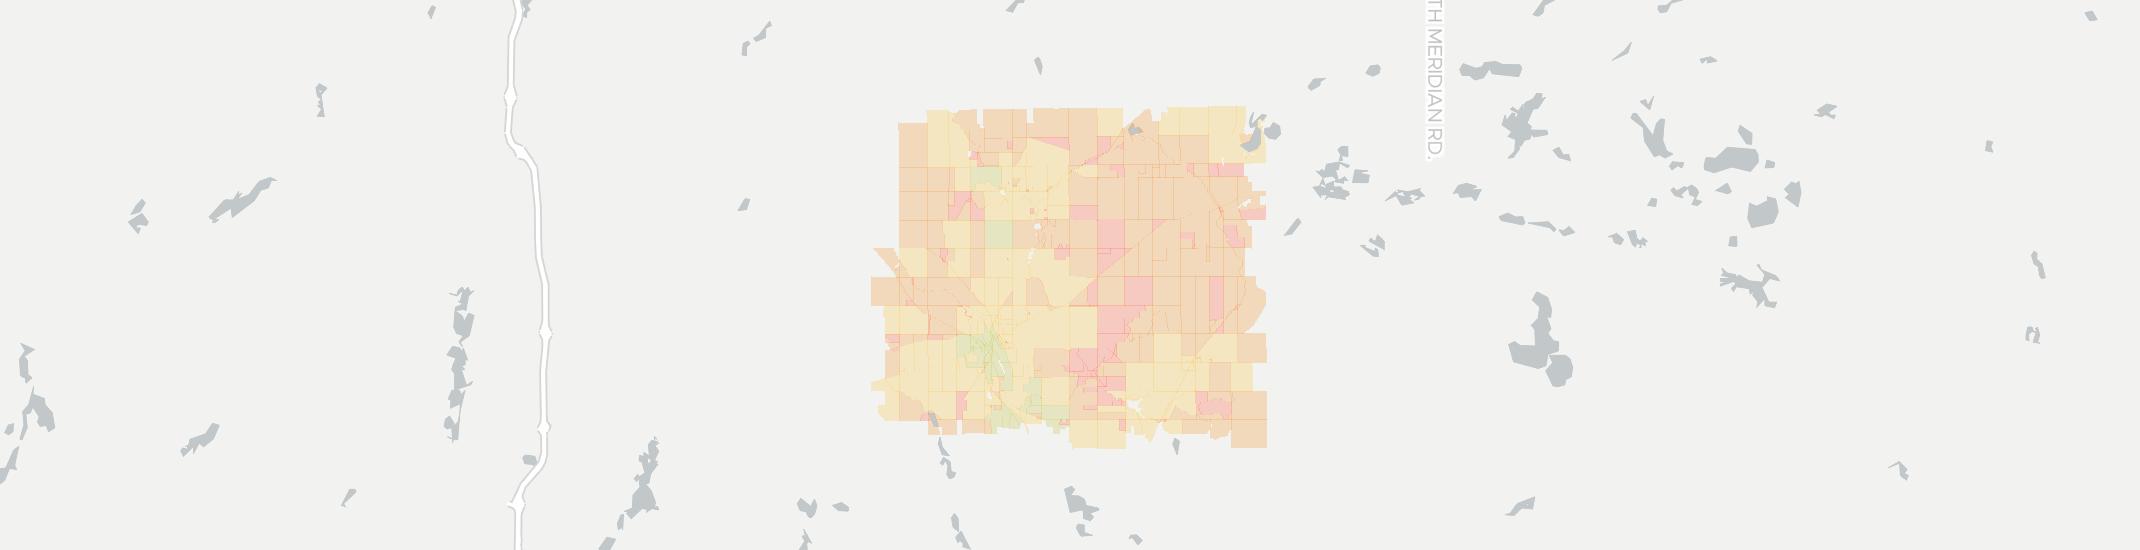 Jonesville Internet Competition Map. Click for interactive map.